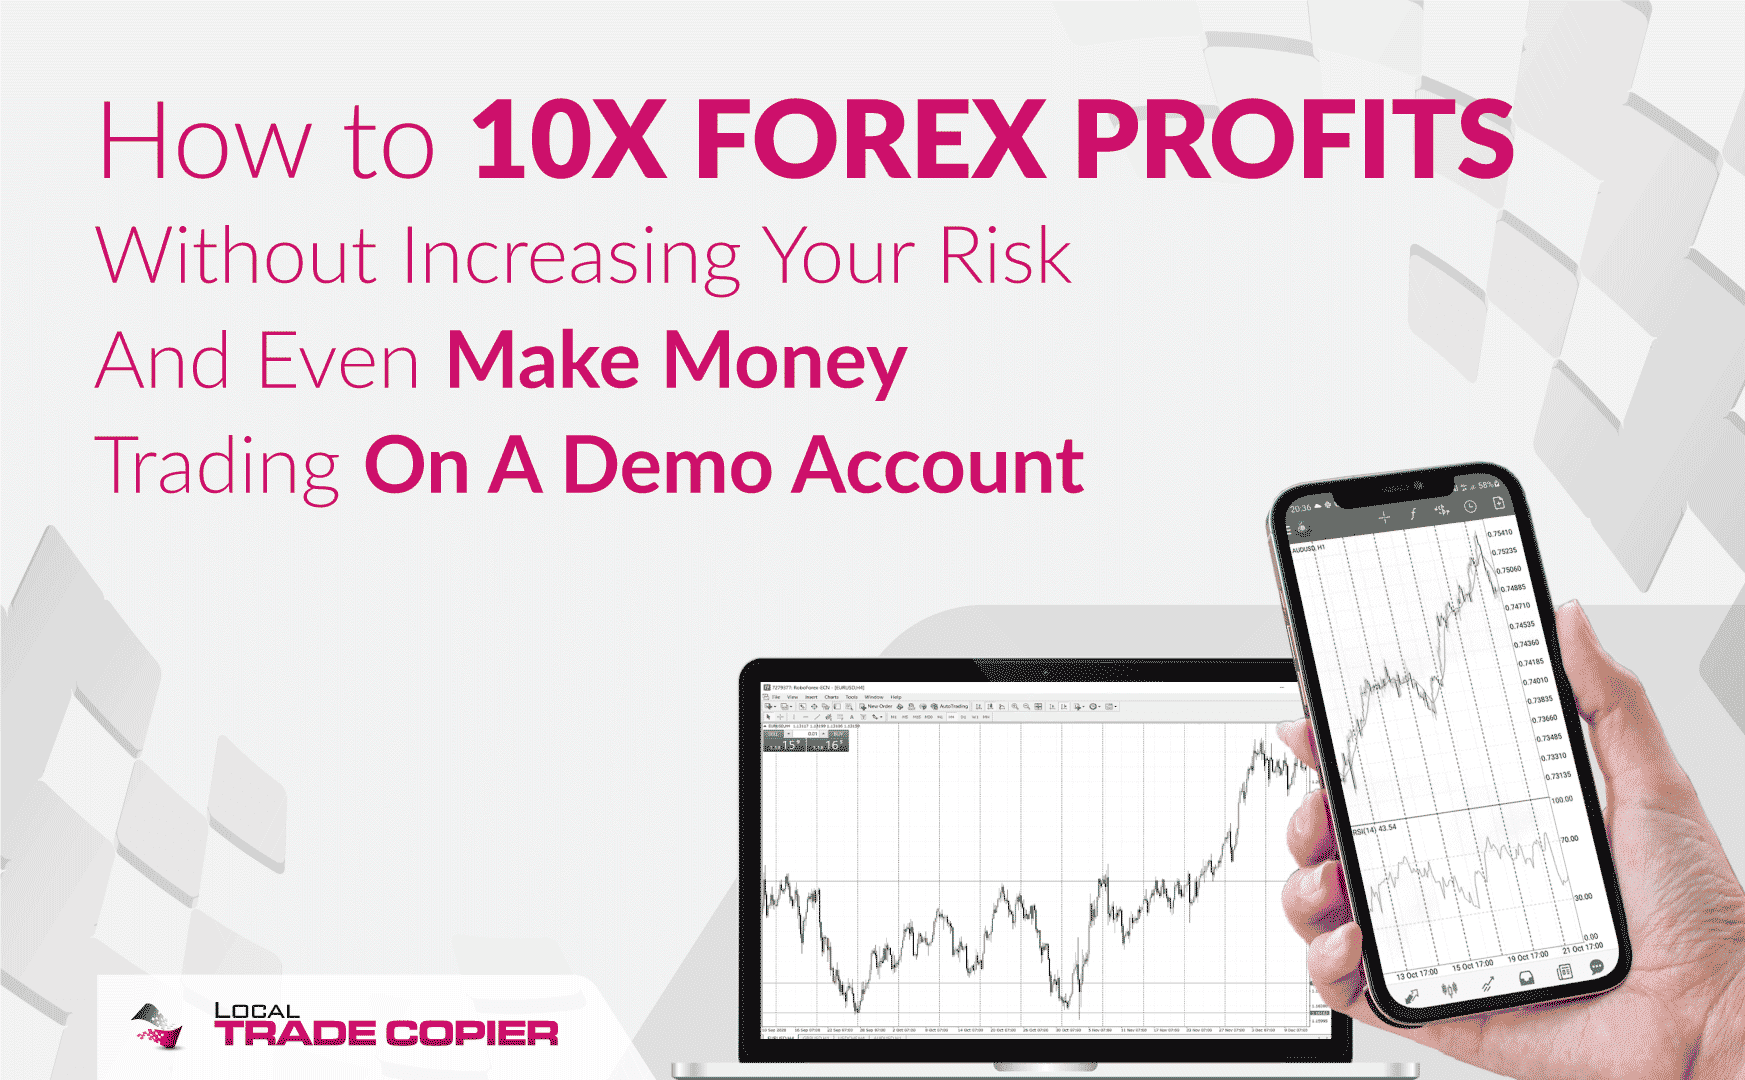 Local-Trade-Copier-Tutorials-How-To-10X-Forex-Profits-Without-Increasing-Your-Risk-And-Even-Make-Money-Trading-On-A-Demo-Account-1745x1080